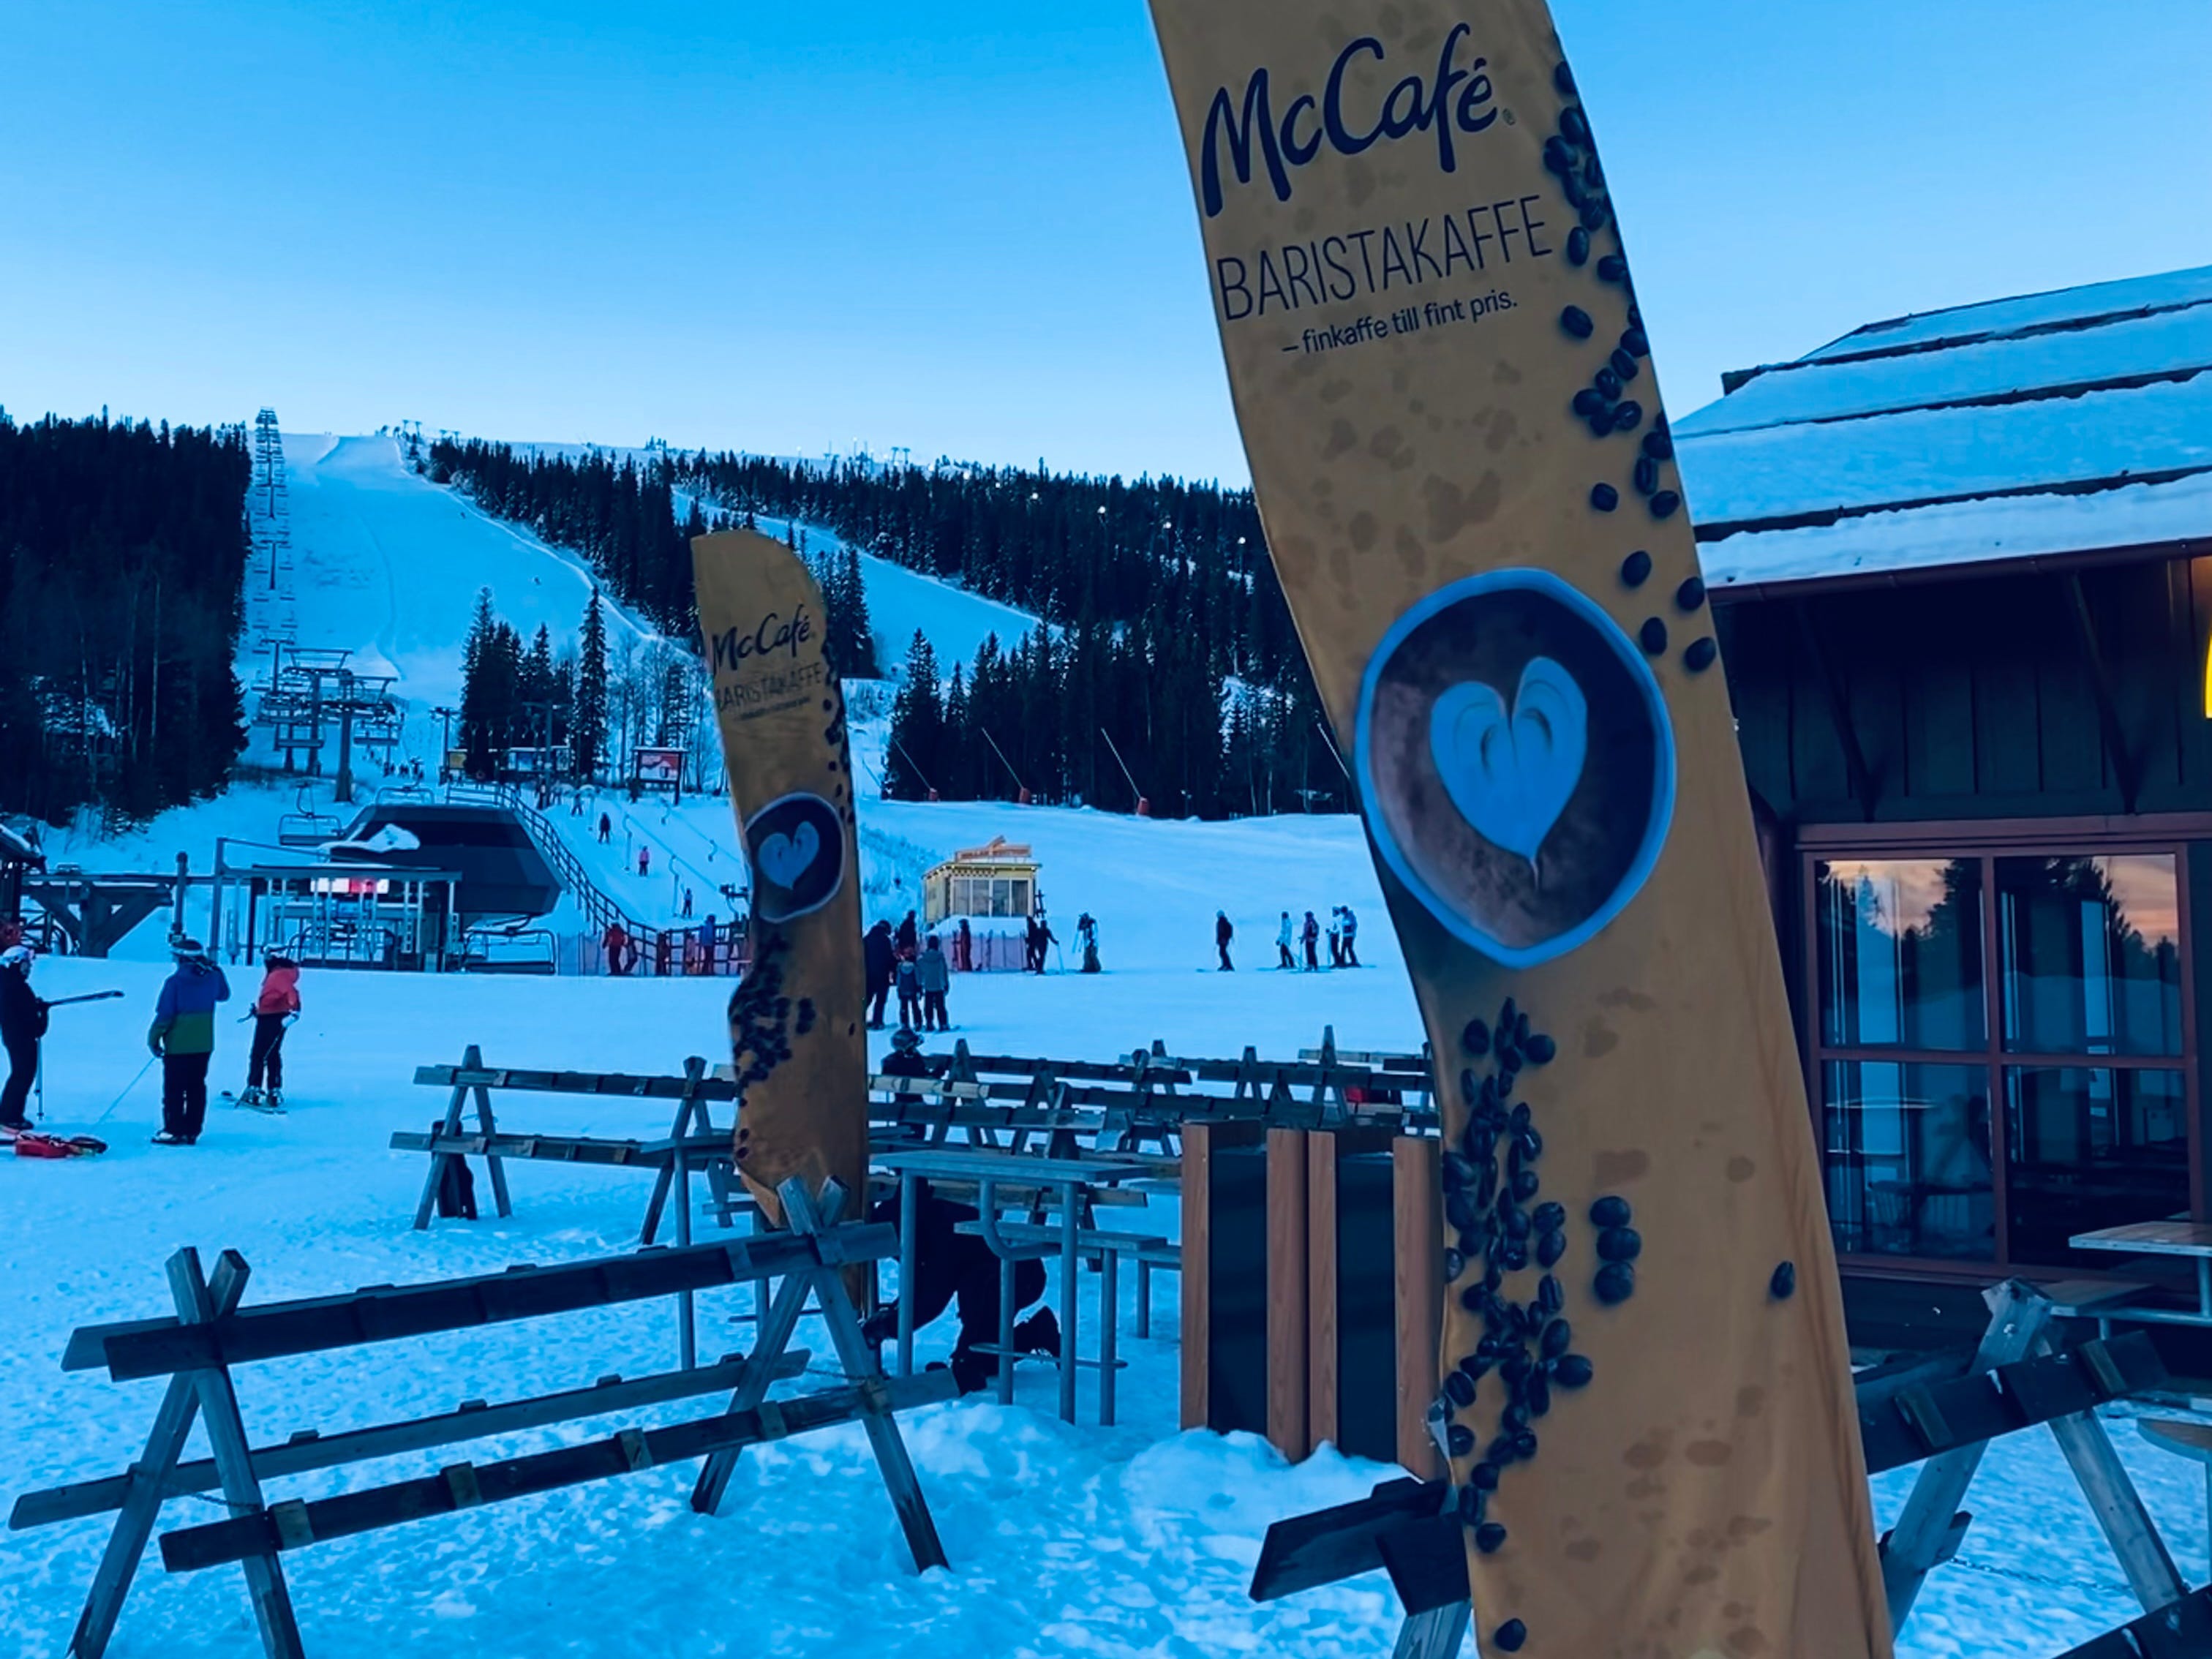 <ul class="summary-list"><li>McDonald's has just one McSki, or Ski-Thru, located in one of Sweden's biggest resorts.</li><li>Hunger skiers can stop for hot chocolates, Big Macs, and doughnuts.</li><li>It offers table service, or you can ski off with your food.</li></ul><p>In the US it's easy to get a Big Mac delivered to your house or order one at the drive-thru, but one restaurant in Sweden lets you ski off with your meal.</p><p>McDonald's has just <a href="https://www.businessinsider.com/mcdonalds-menu-items-europe-germany-austria-italy-switzerland-2023-3">one restaurant</a> with a so-called Ski-Thru, located at the Lindvallen <a href="https://www.businessinsider.com/sc/a-beginners-guide-to-mastering-your-first-ski-trip">ski resort</a> in Sälen, Sweden.</p><p>The McSki restaurant, as it's also known, opened in 1996 and feeds hungry skiers throughout the winter.</p><div class="read-original">Read the original article on <a href="https://www.businessinsider.com/mcski-sweden-ski-thru-mcdonalds-photos-2024-3">Business Insider</a></div>